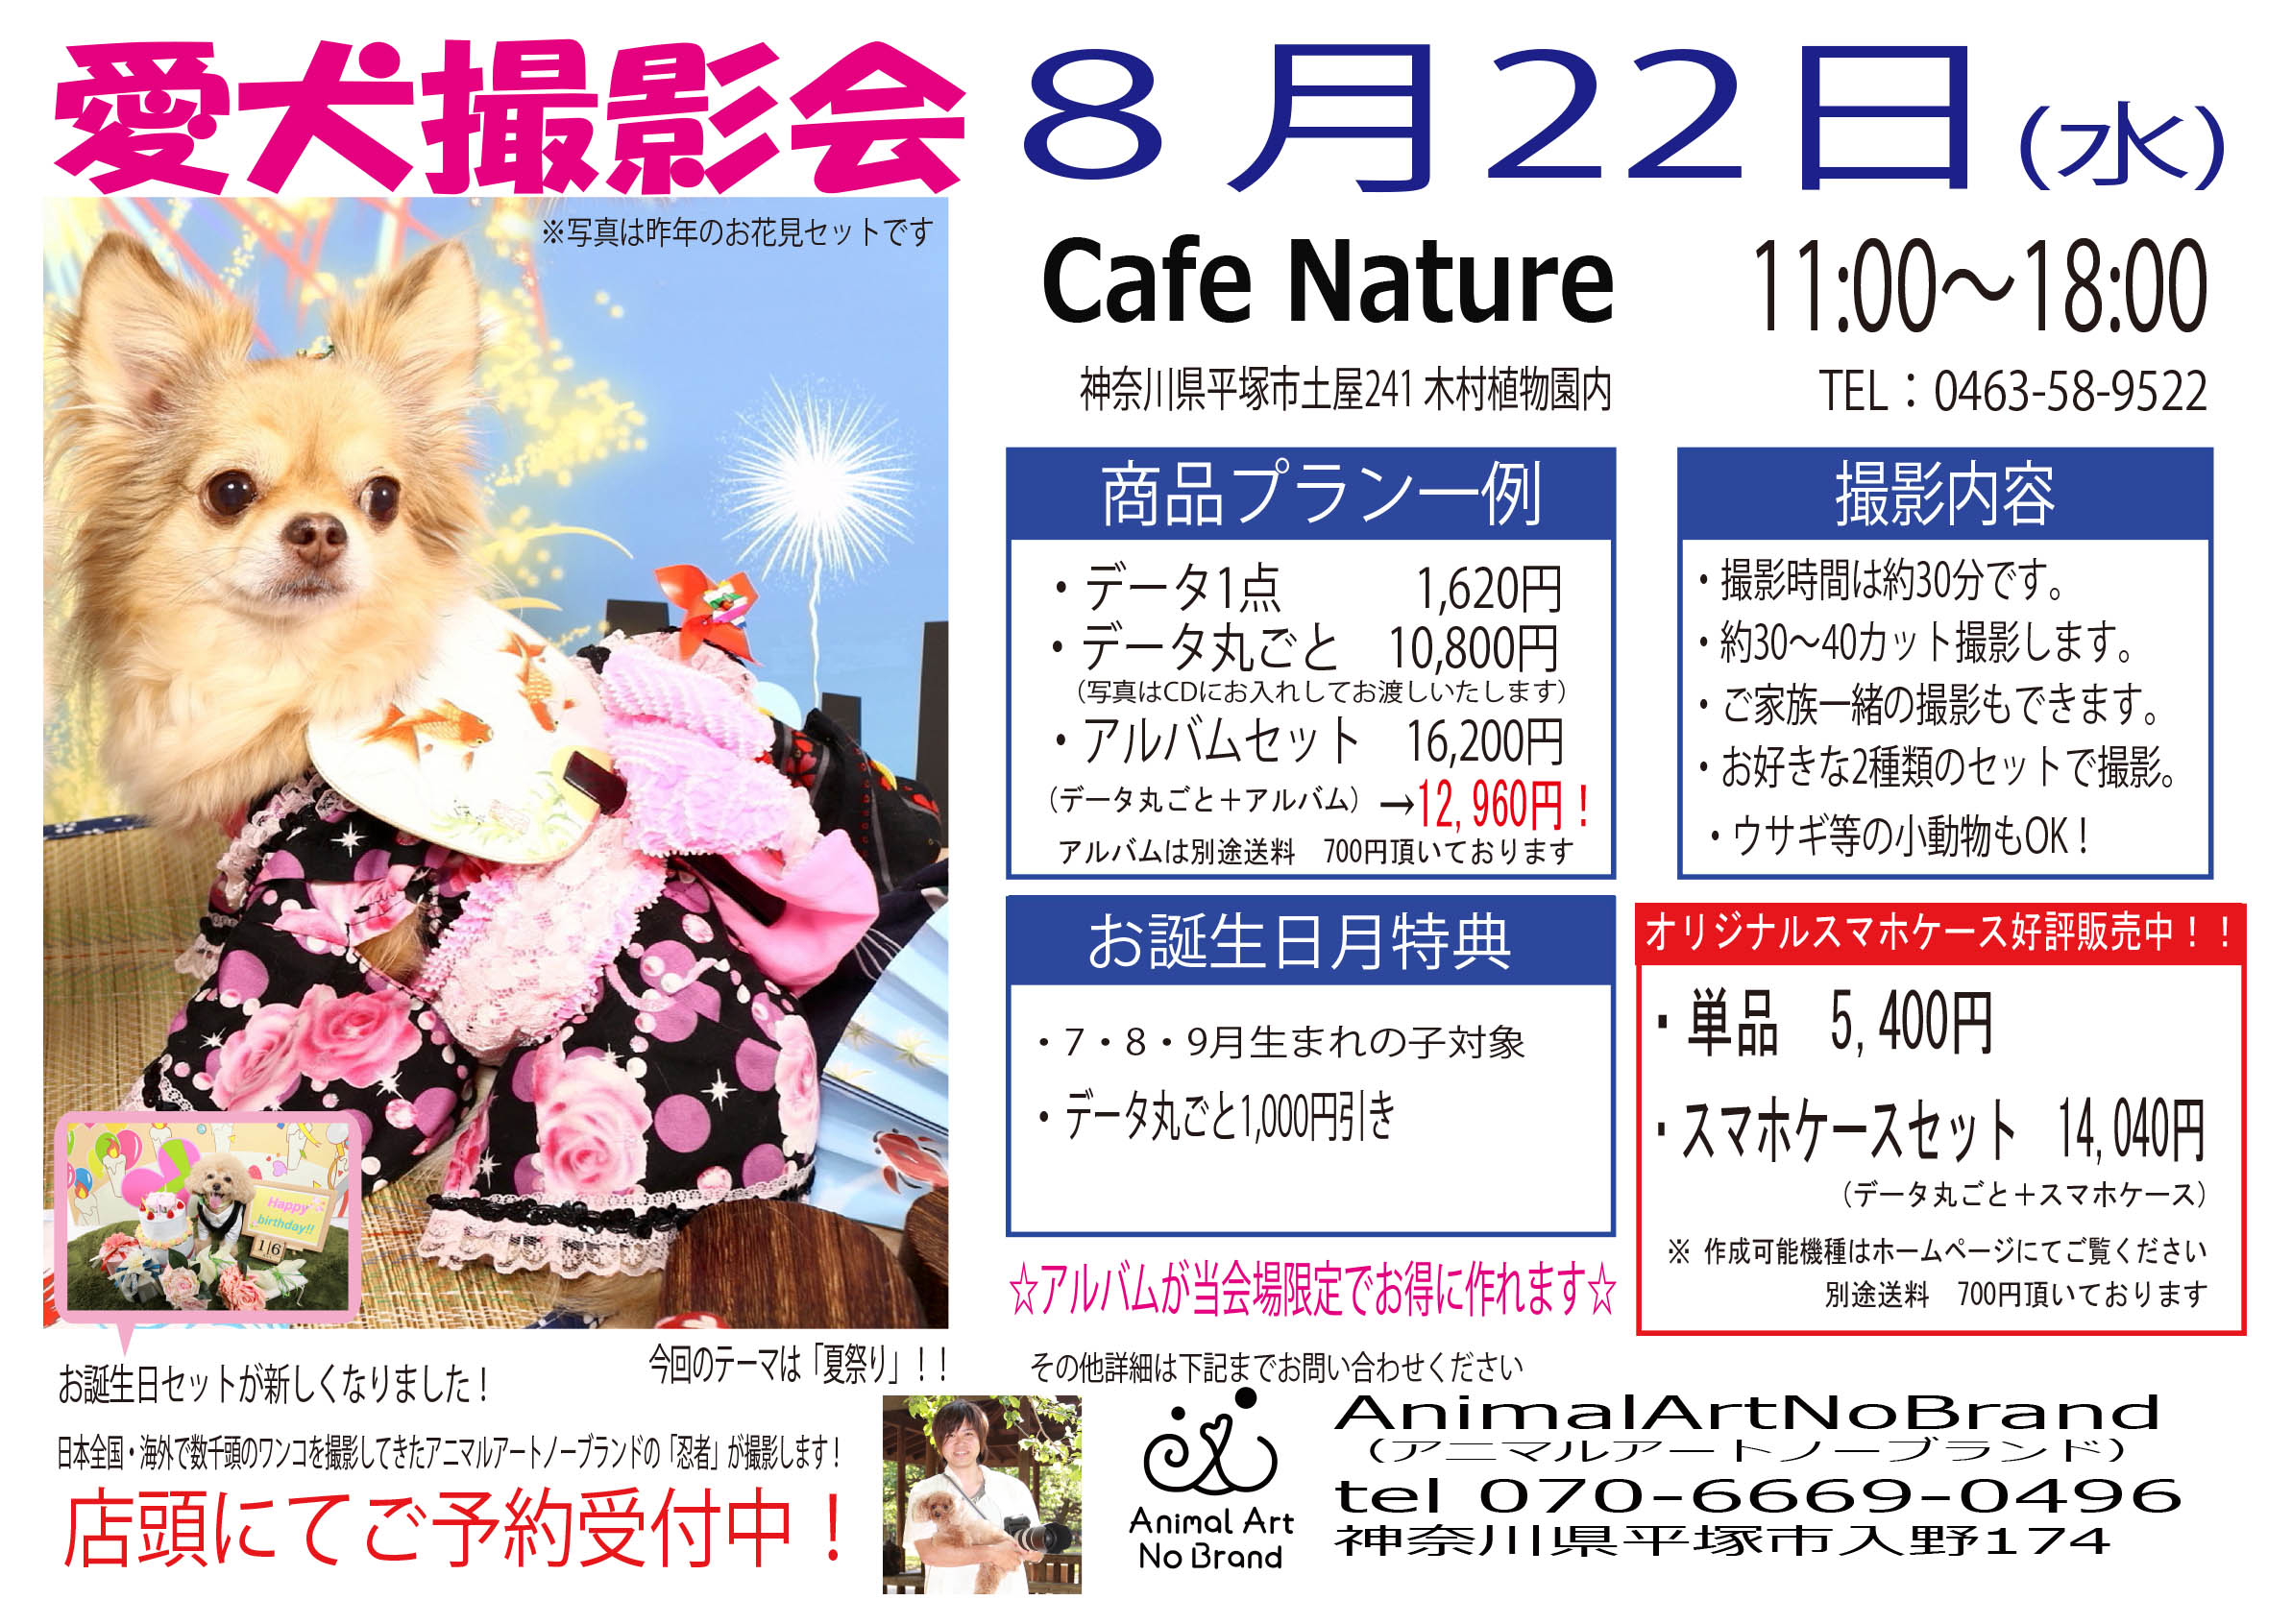 Cafe Nature